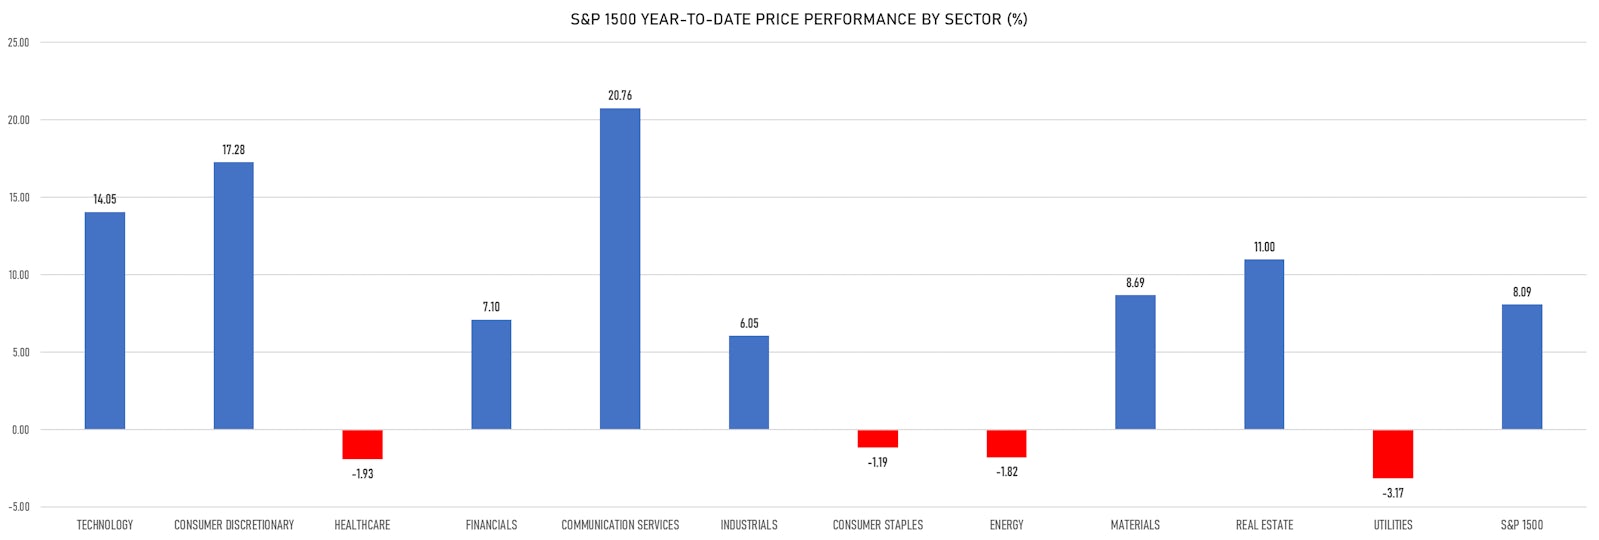 S&P 1500 Price Performance By Sector YTD | Sources: phipost.com, Refinitiv data